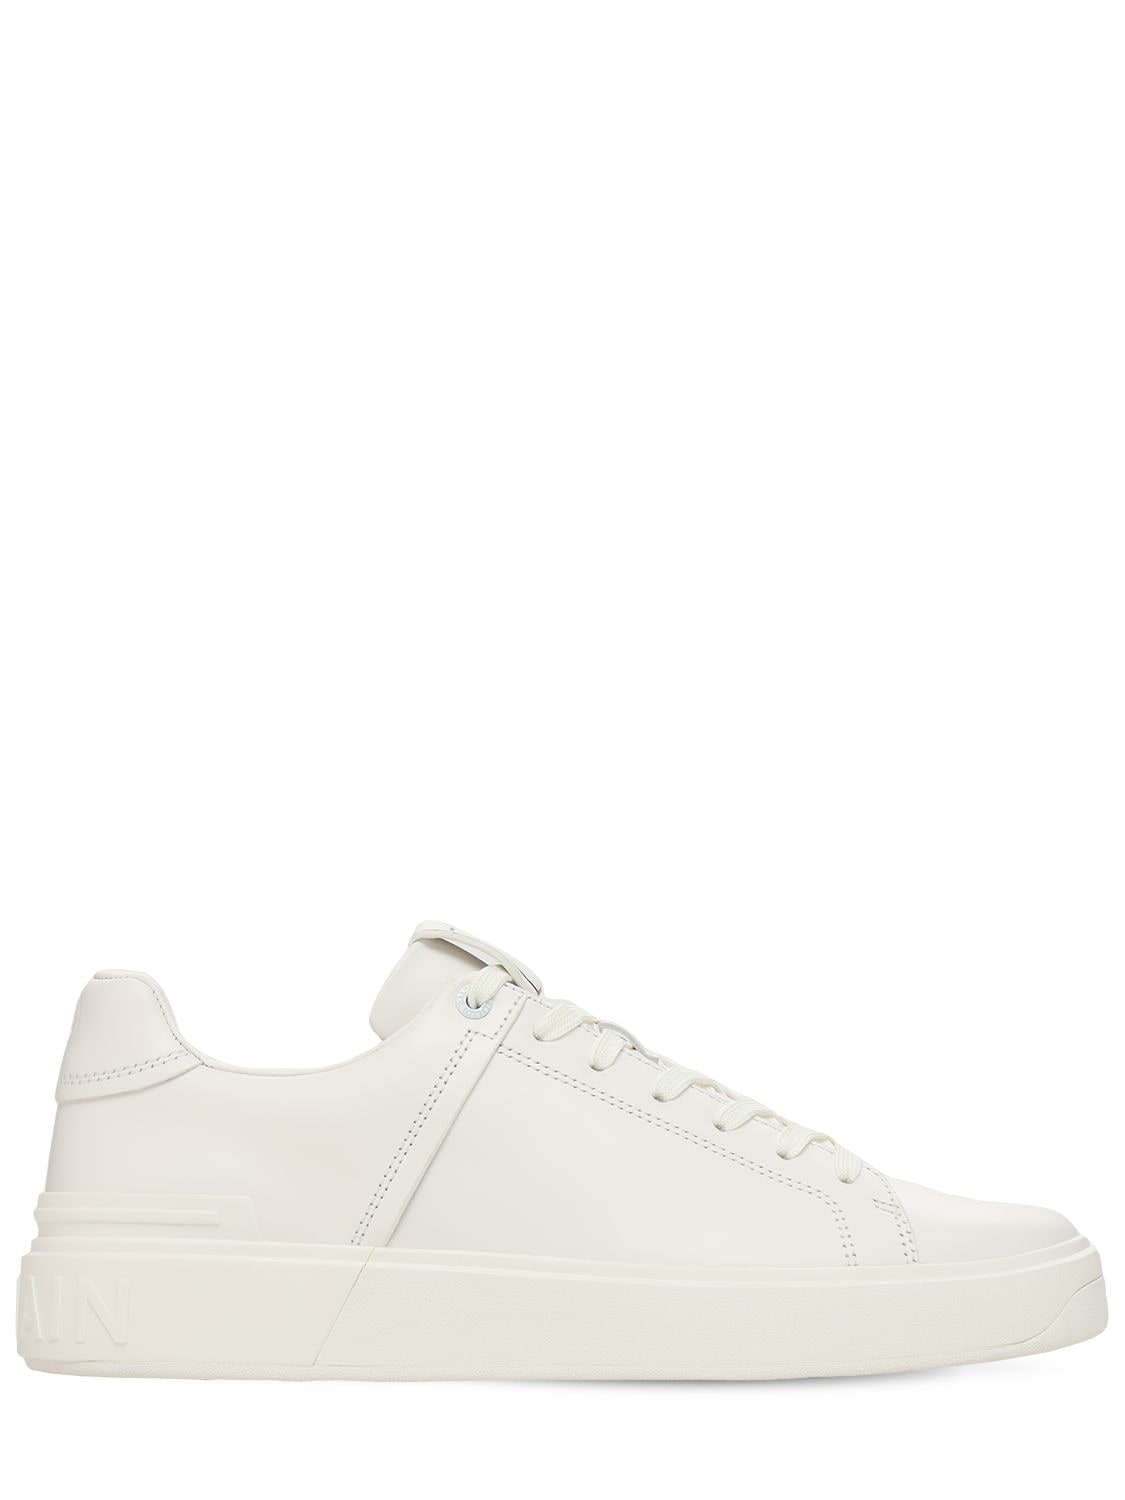 Balmain B Court Leather Low Top Sneakers In White | ModeSens